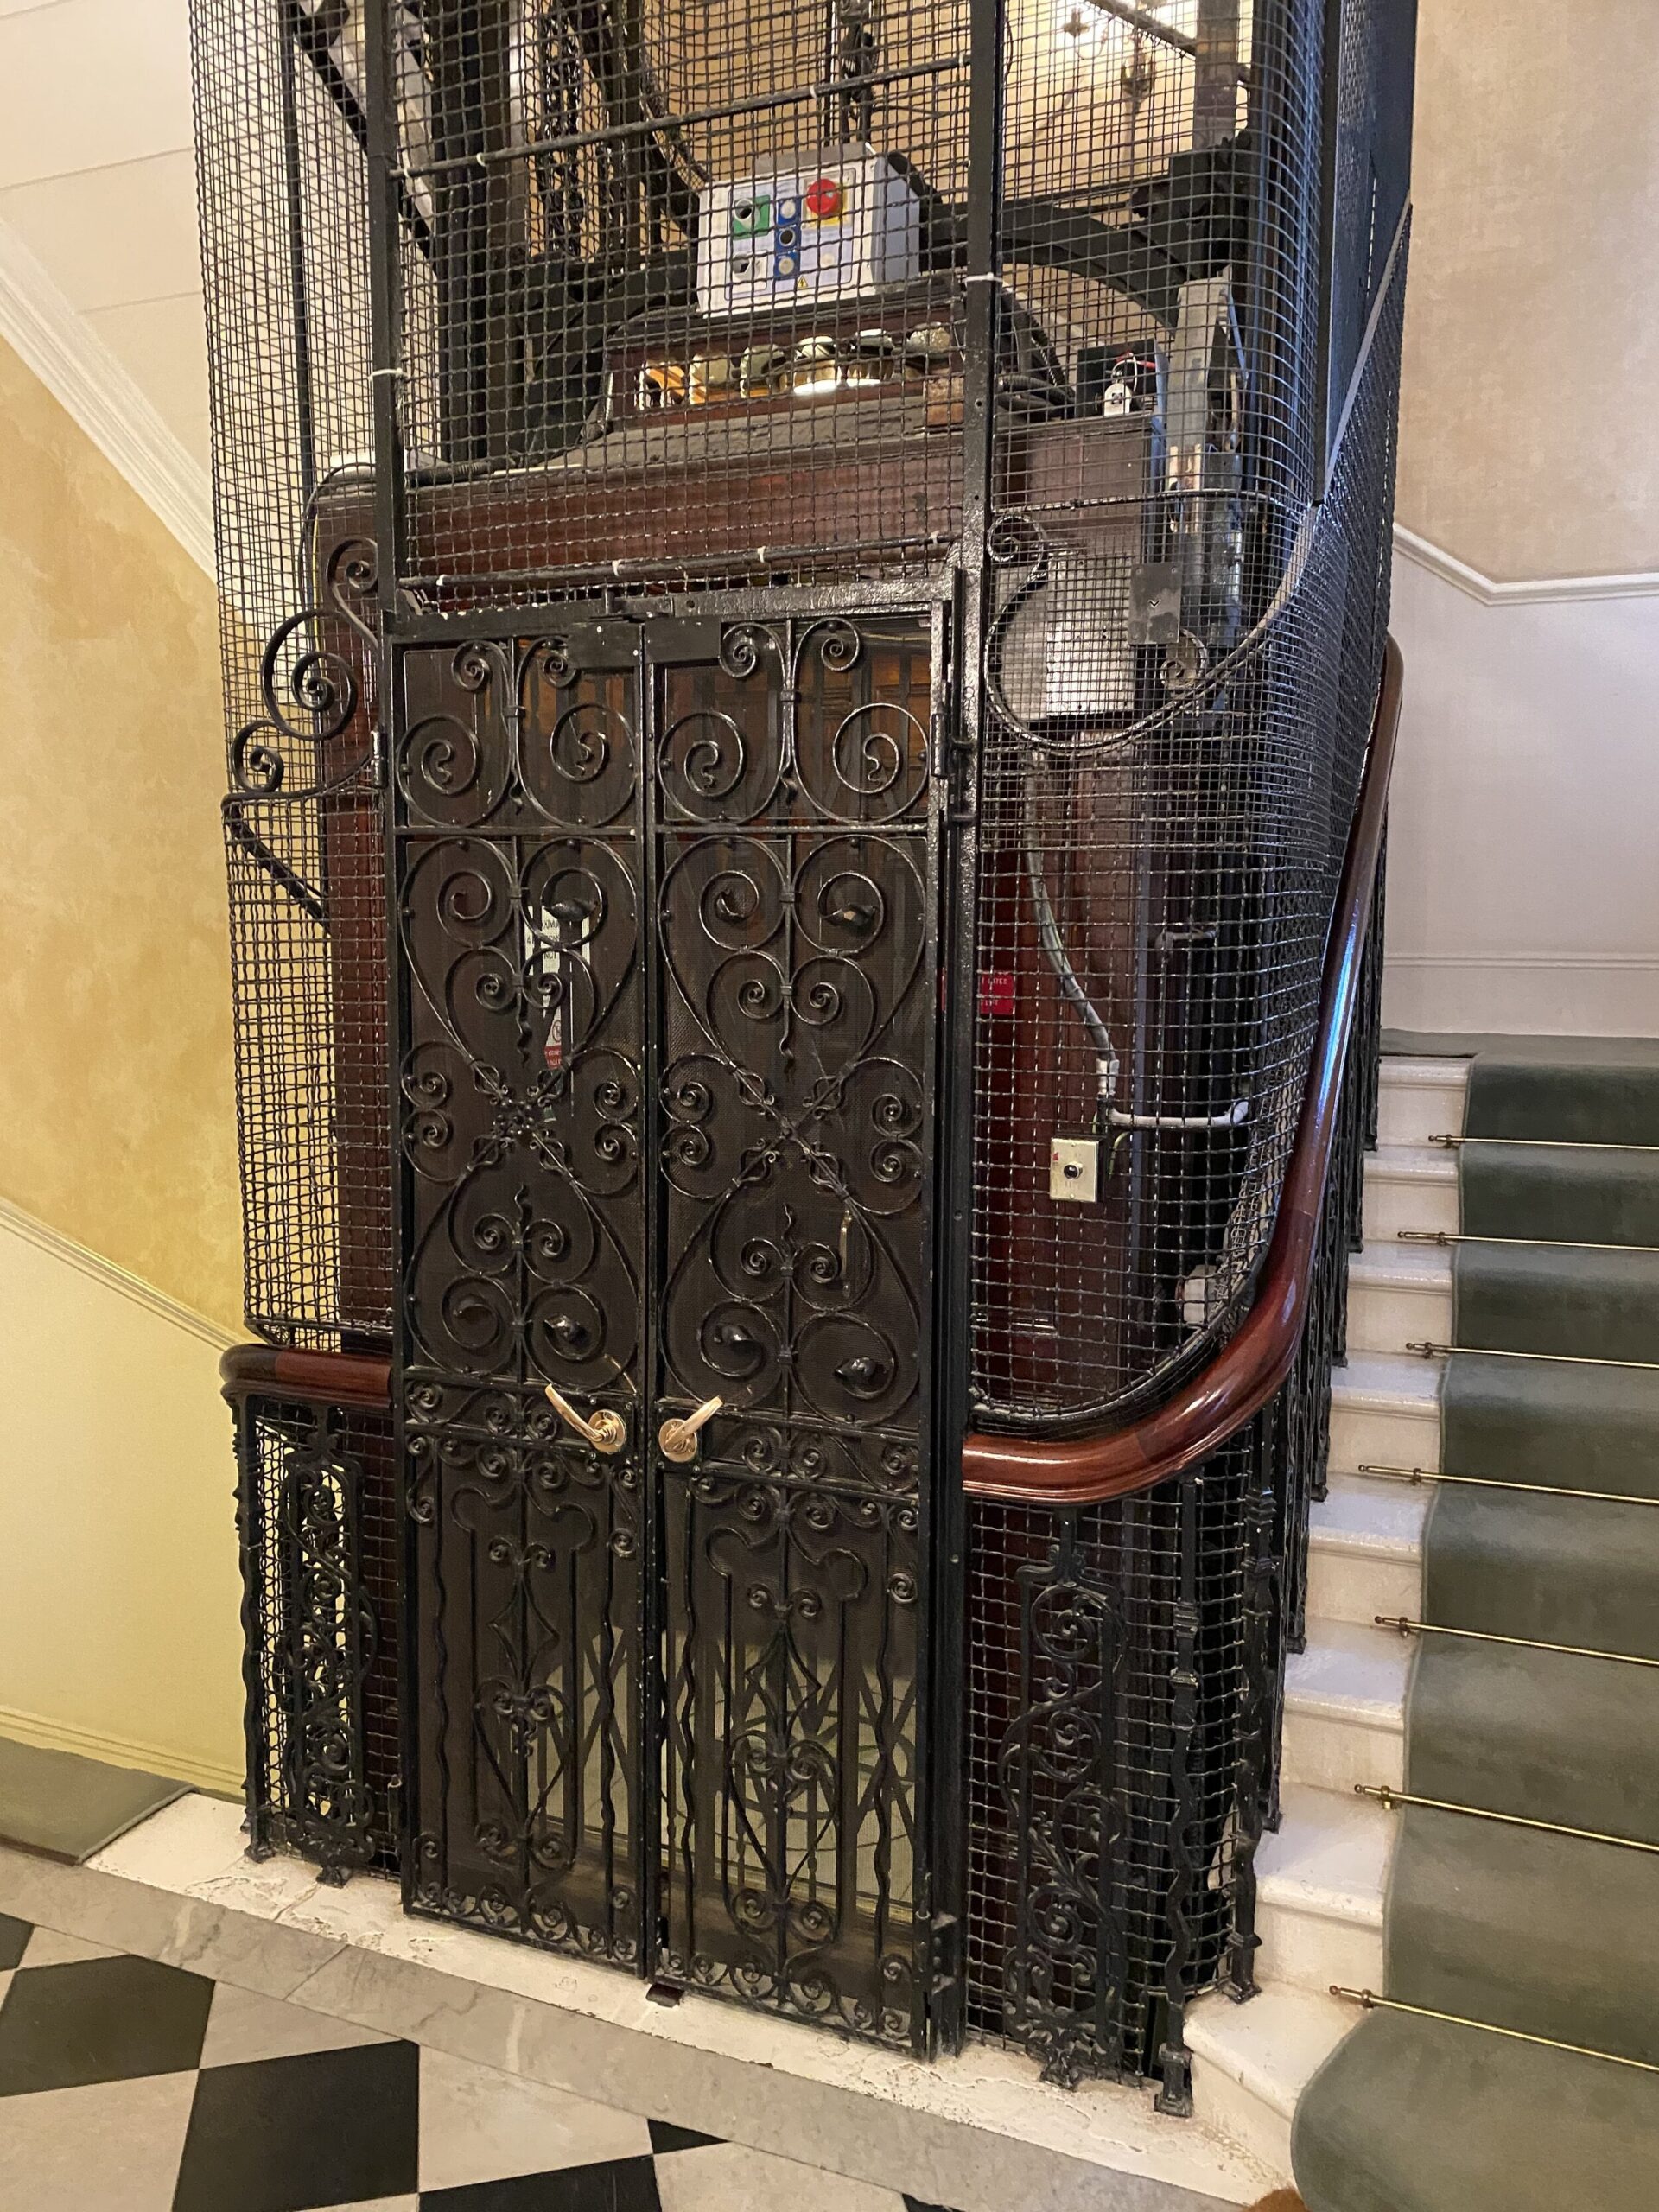 Old style lift with railings